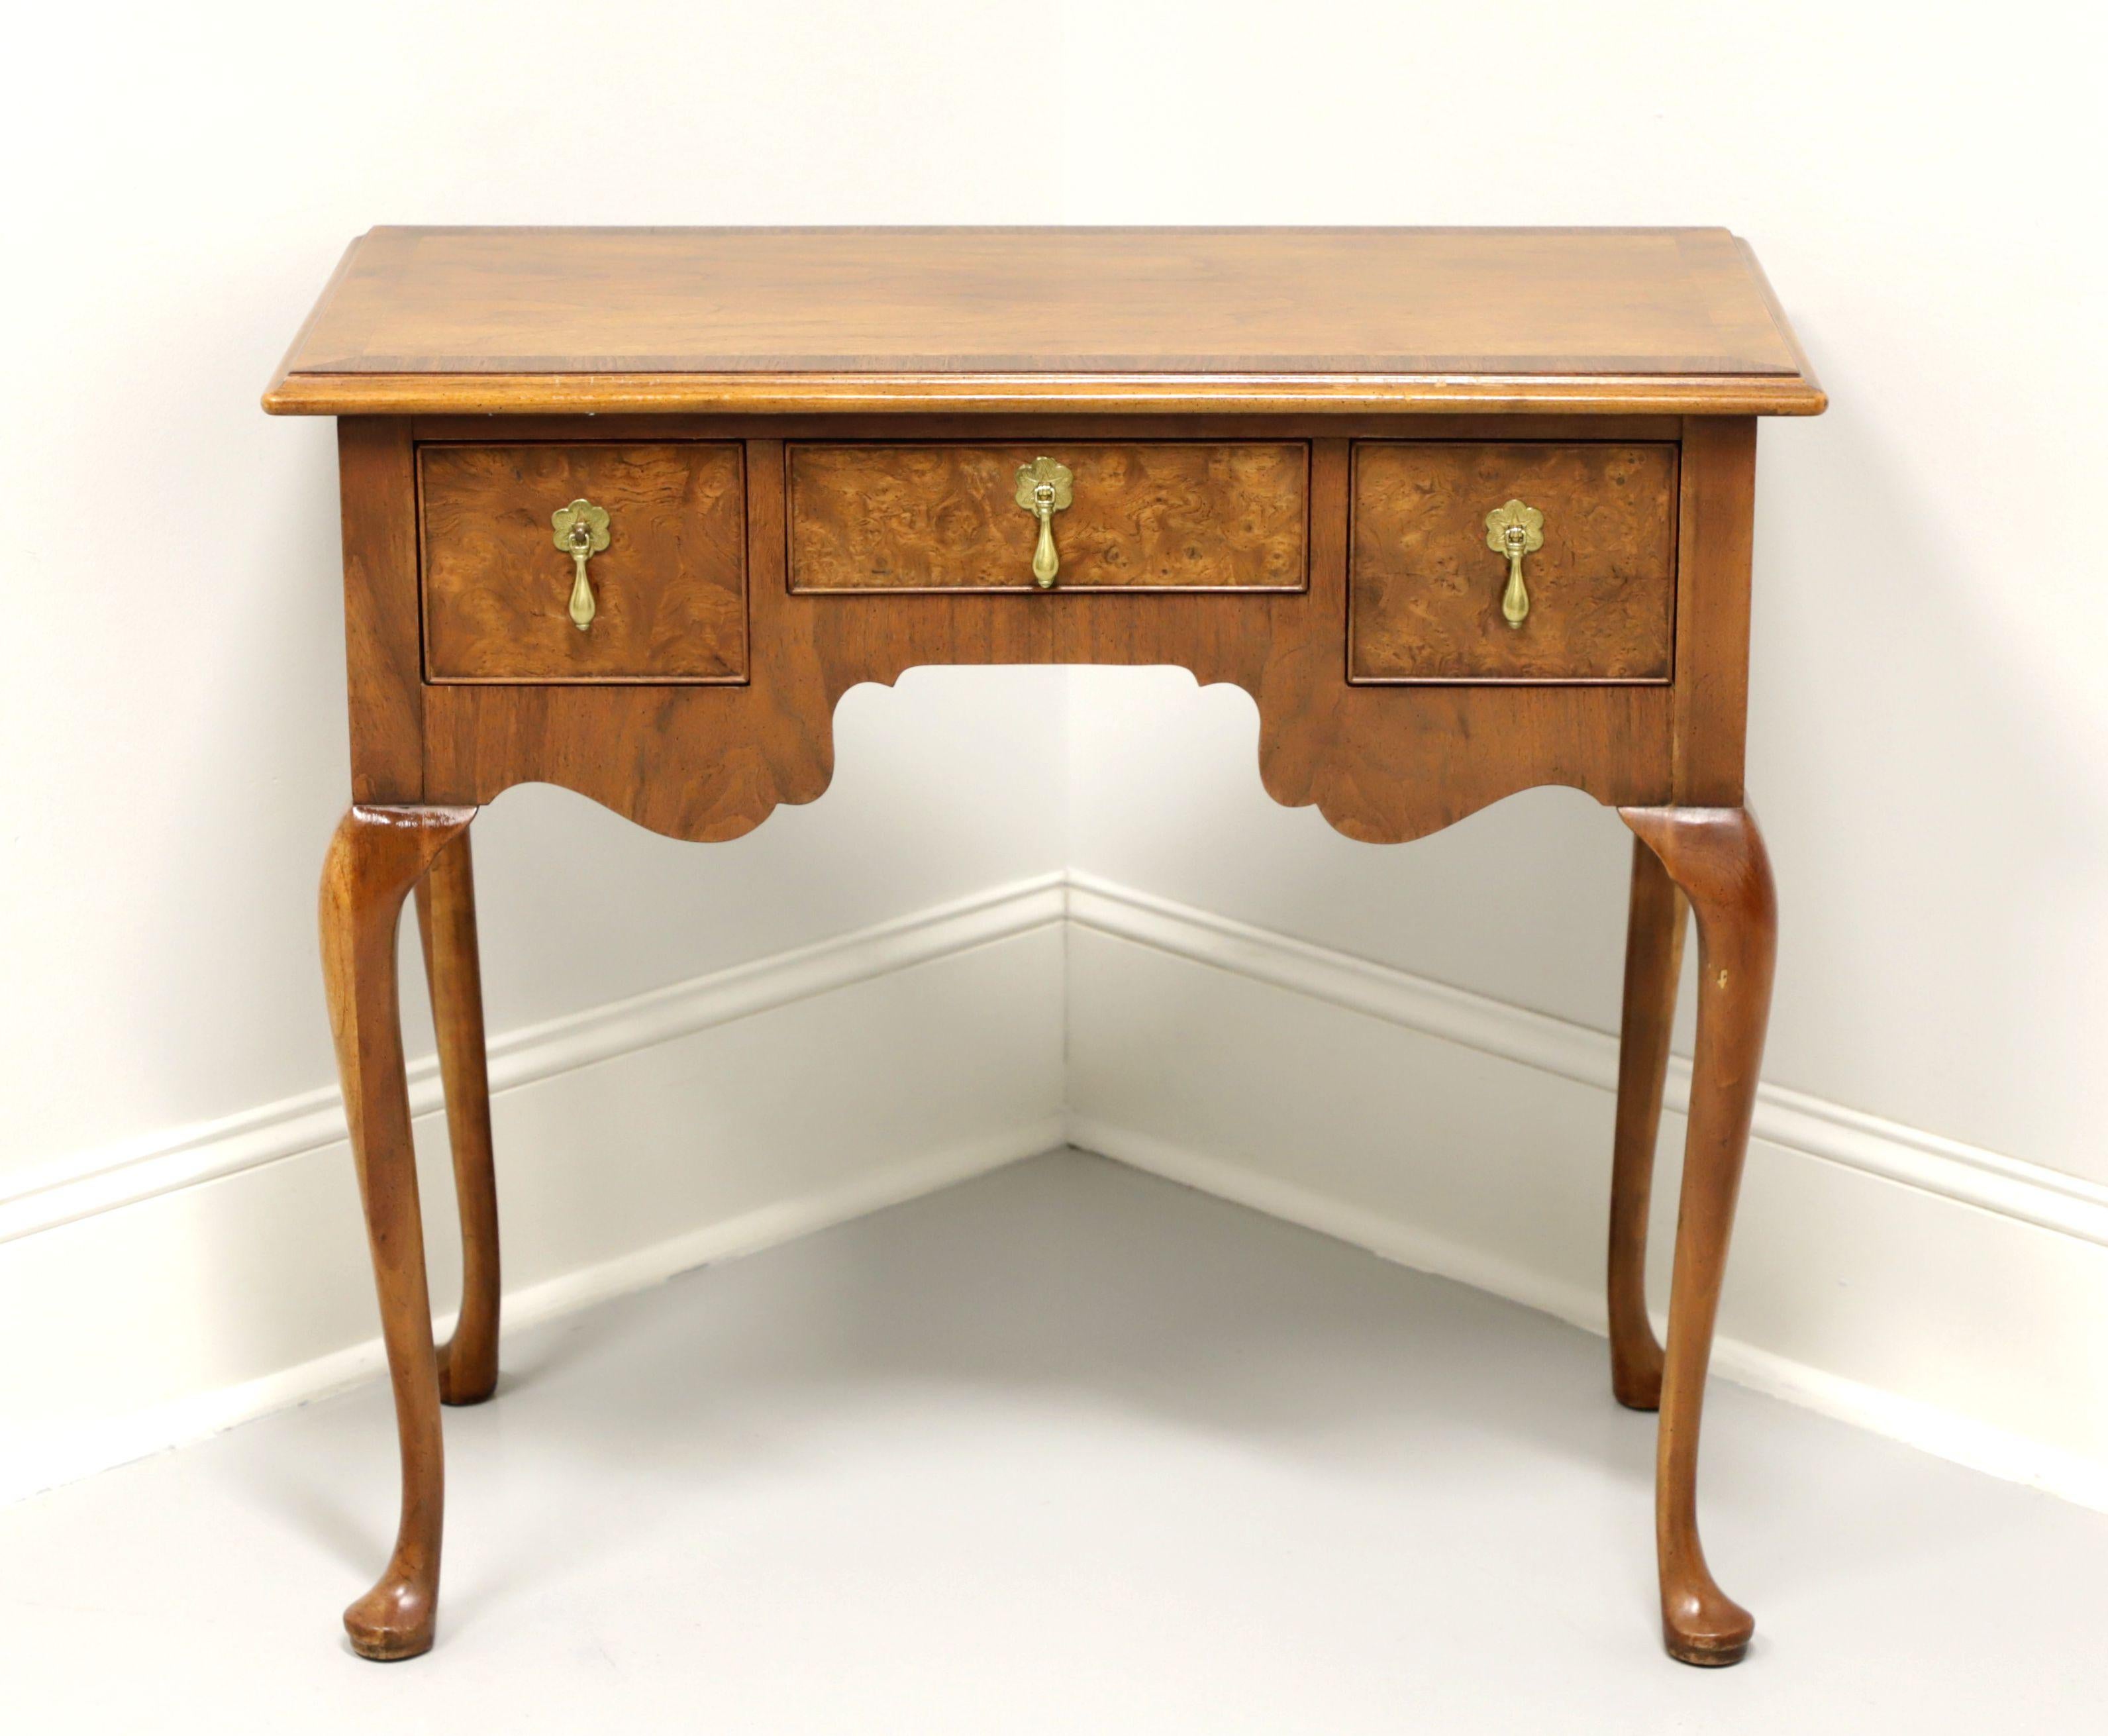 A Queen Anne style side table by top-quality furniture maker Baker Furniture, of North Carolina, USA. Walnut with inlaid banding to top and burl walnut inlays to drawer fronts. Features three dovetail drawers with brass hardware. Made in the late